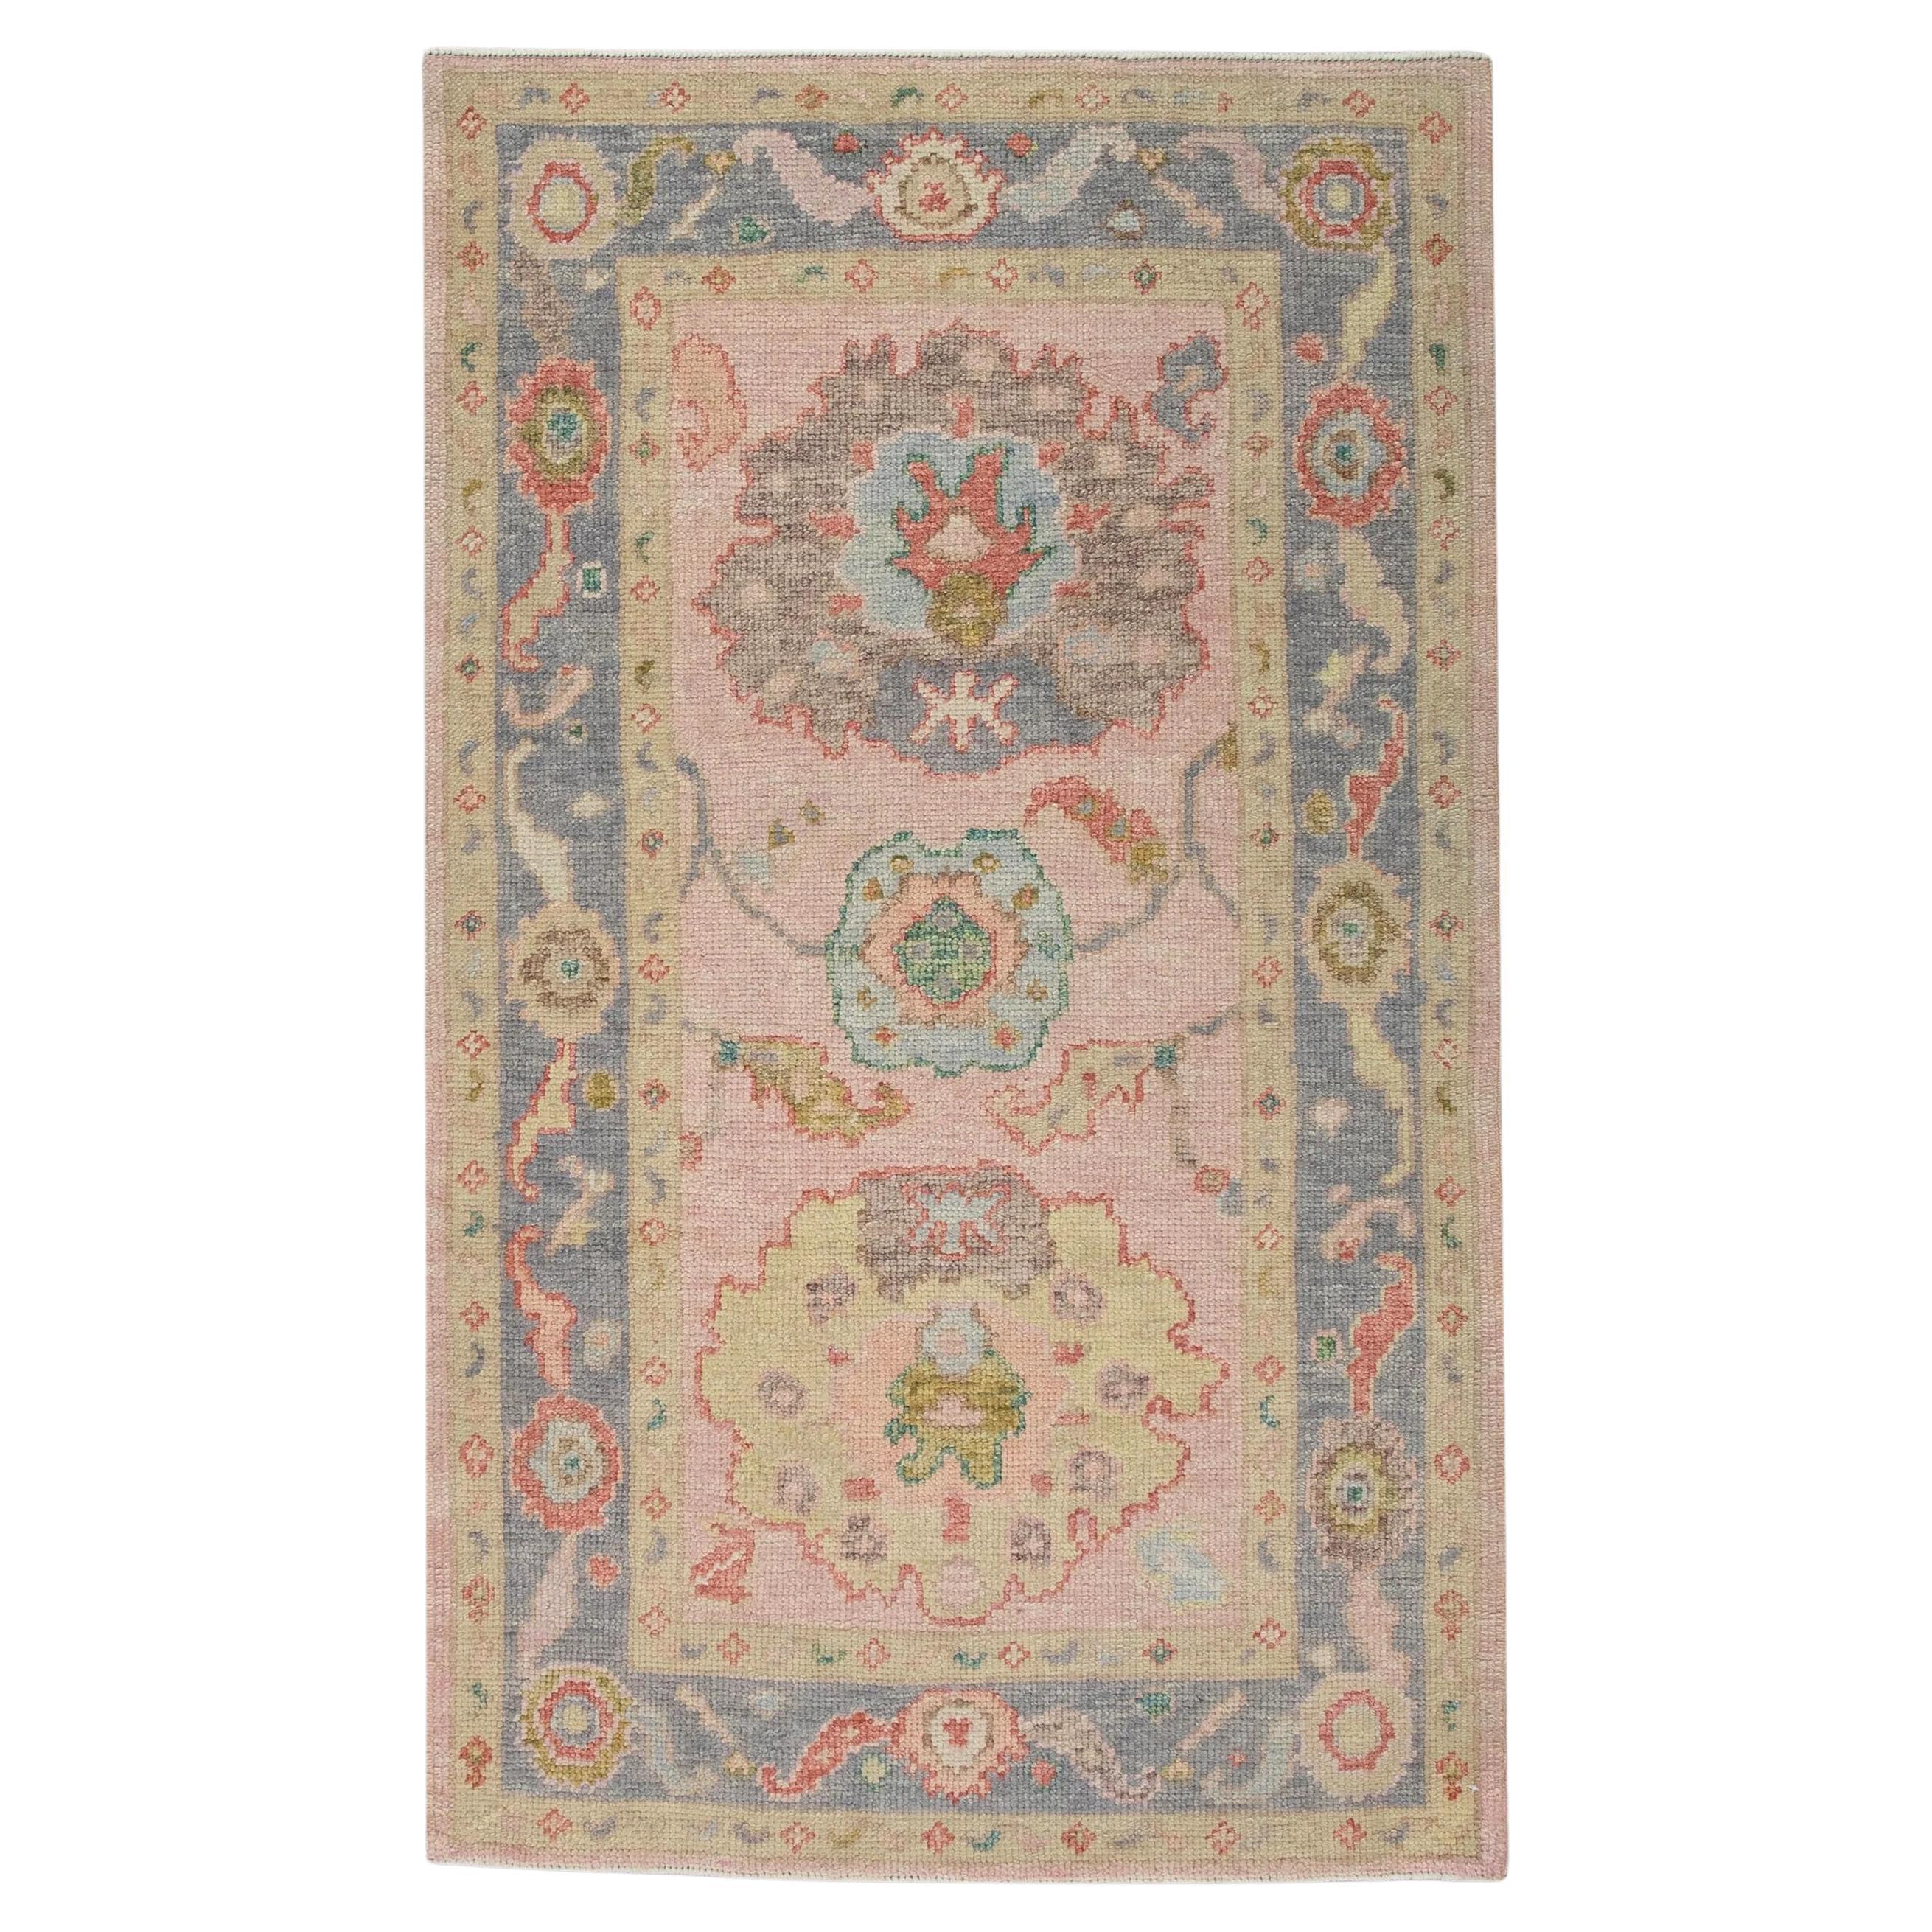 Soft Pink Handwoven Wool Turkish Oushak Rug in Floral Pattern 3' x 4'10" For Sale